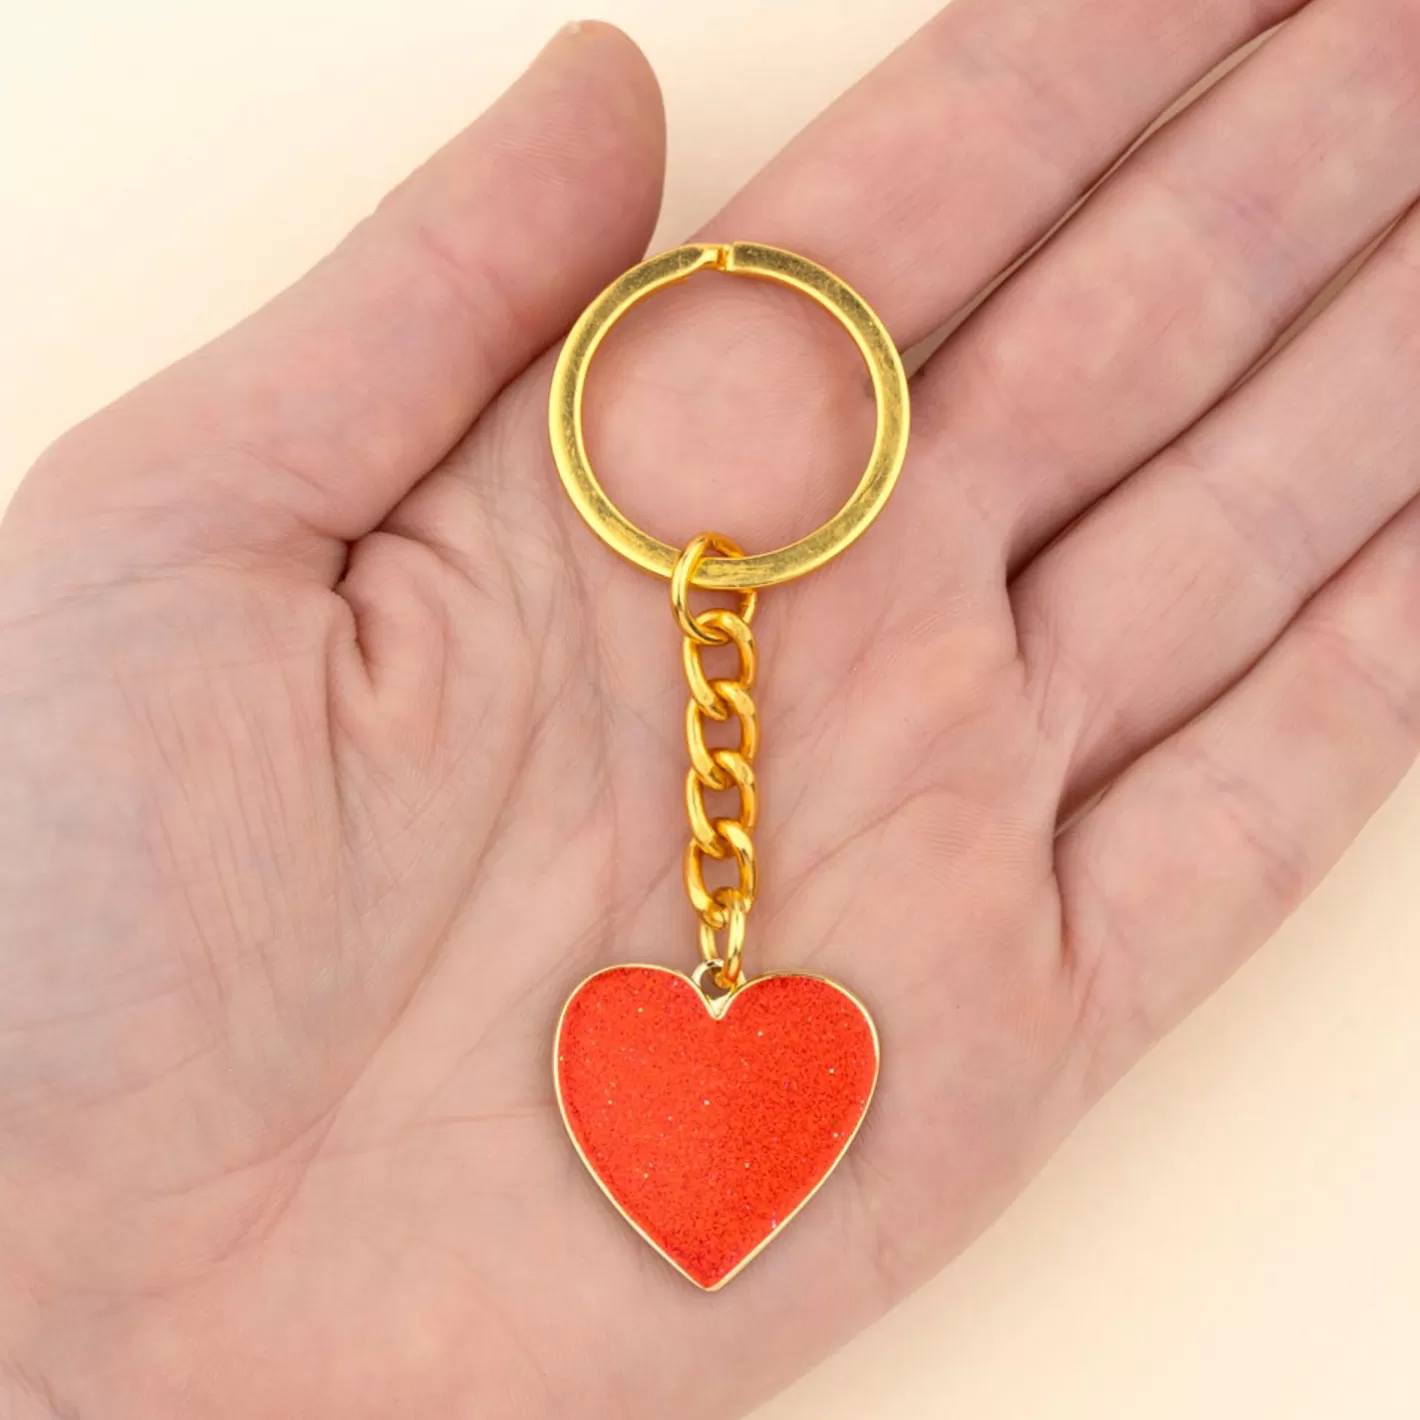 Heart Key Ring>Coucou Suzette Outlet